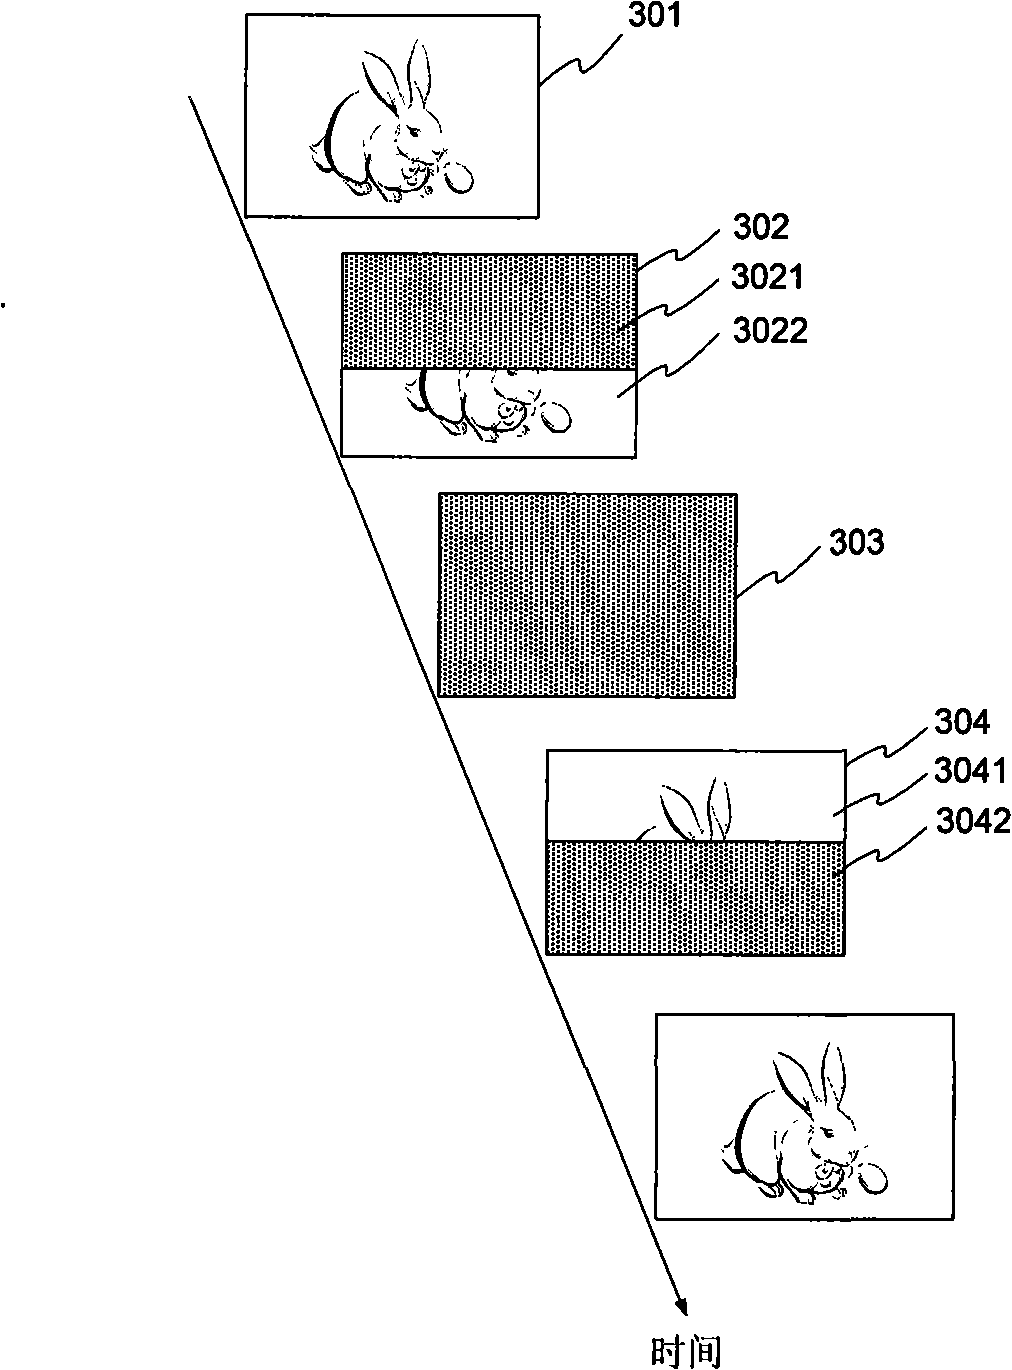 Method for implementing negative pulse annealing through writing data